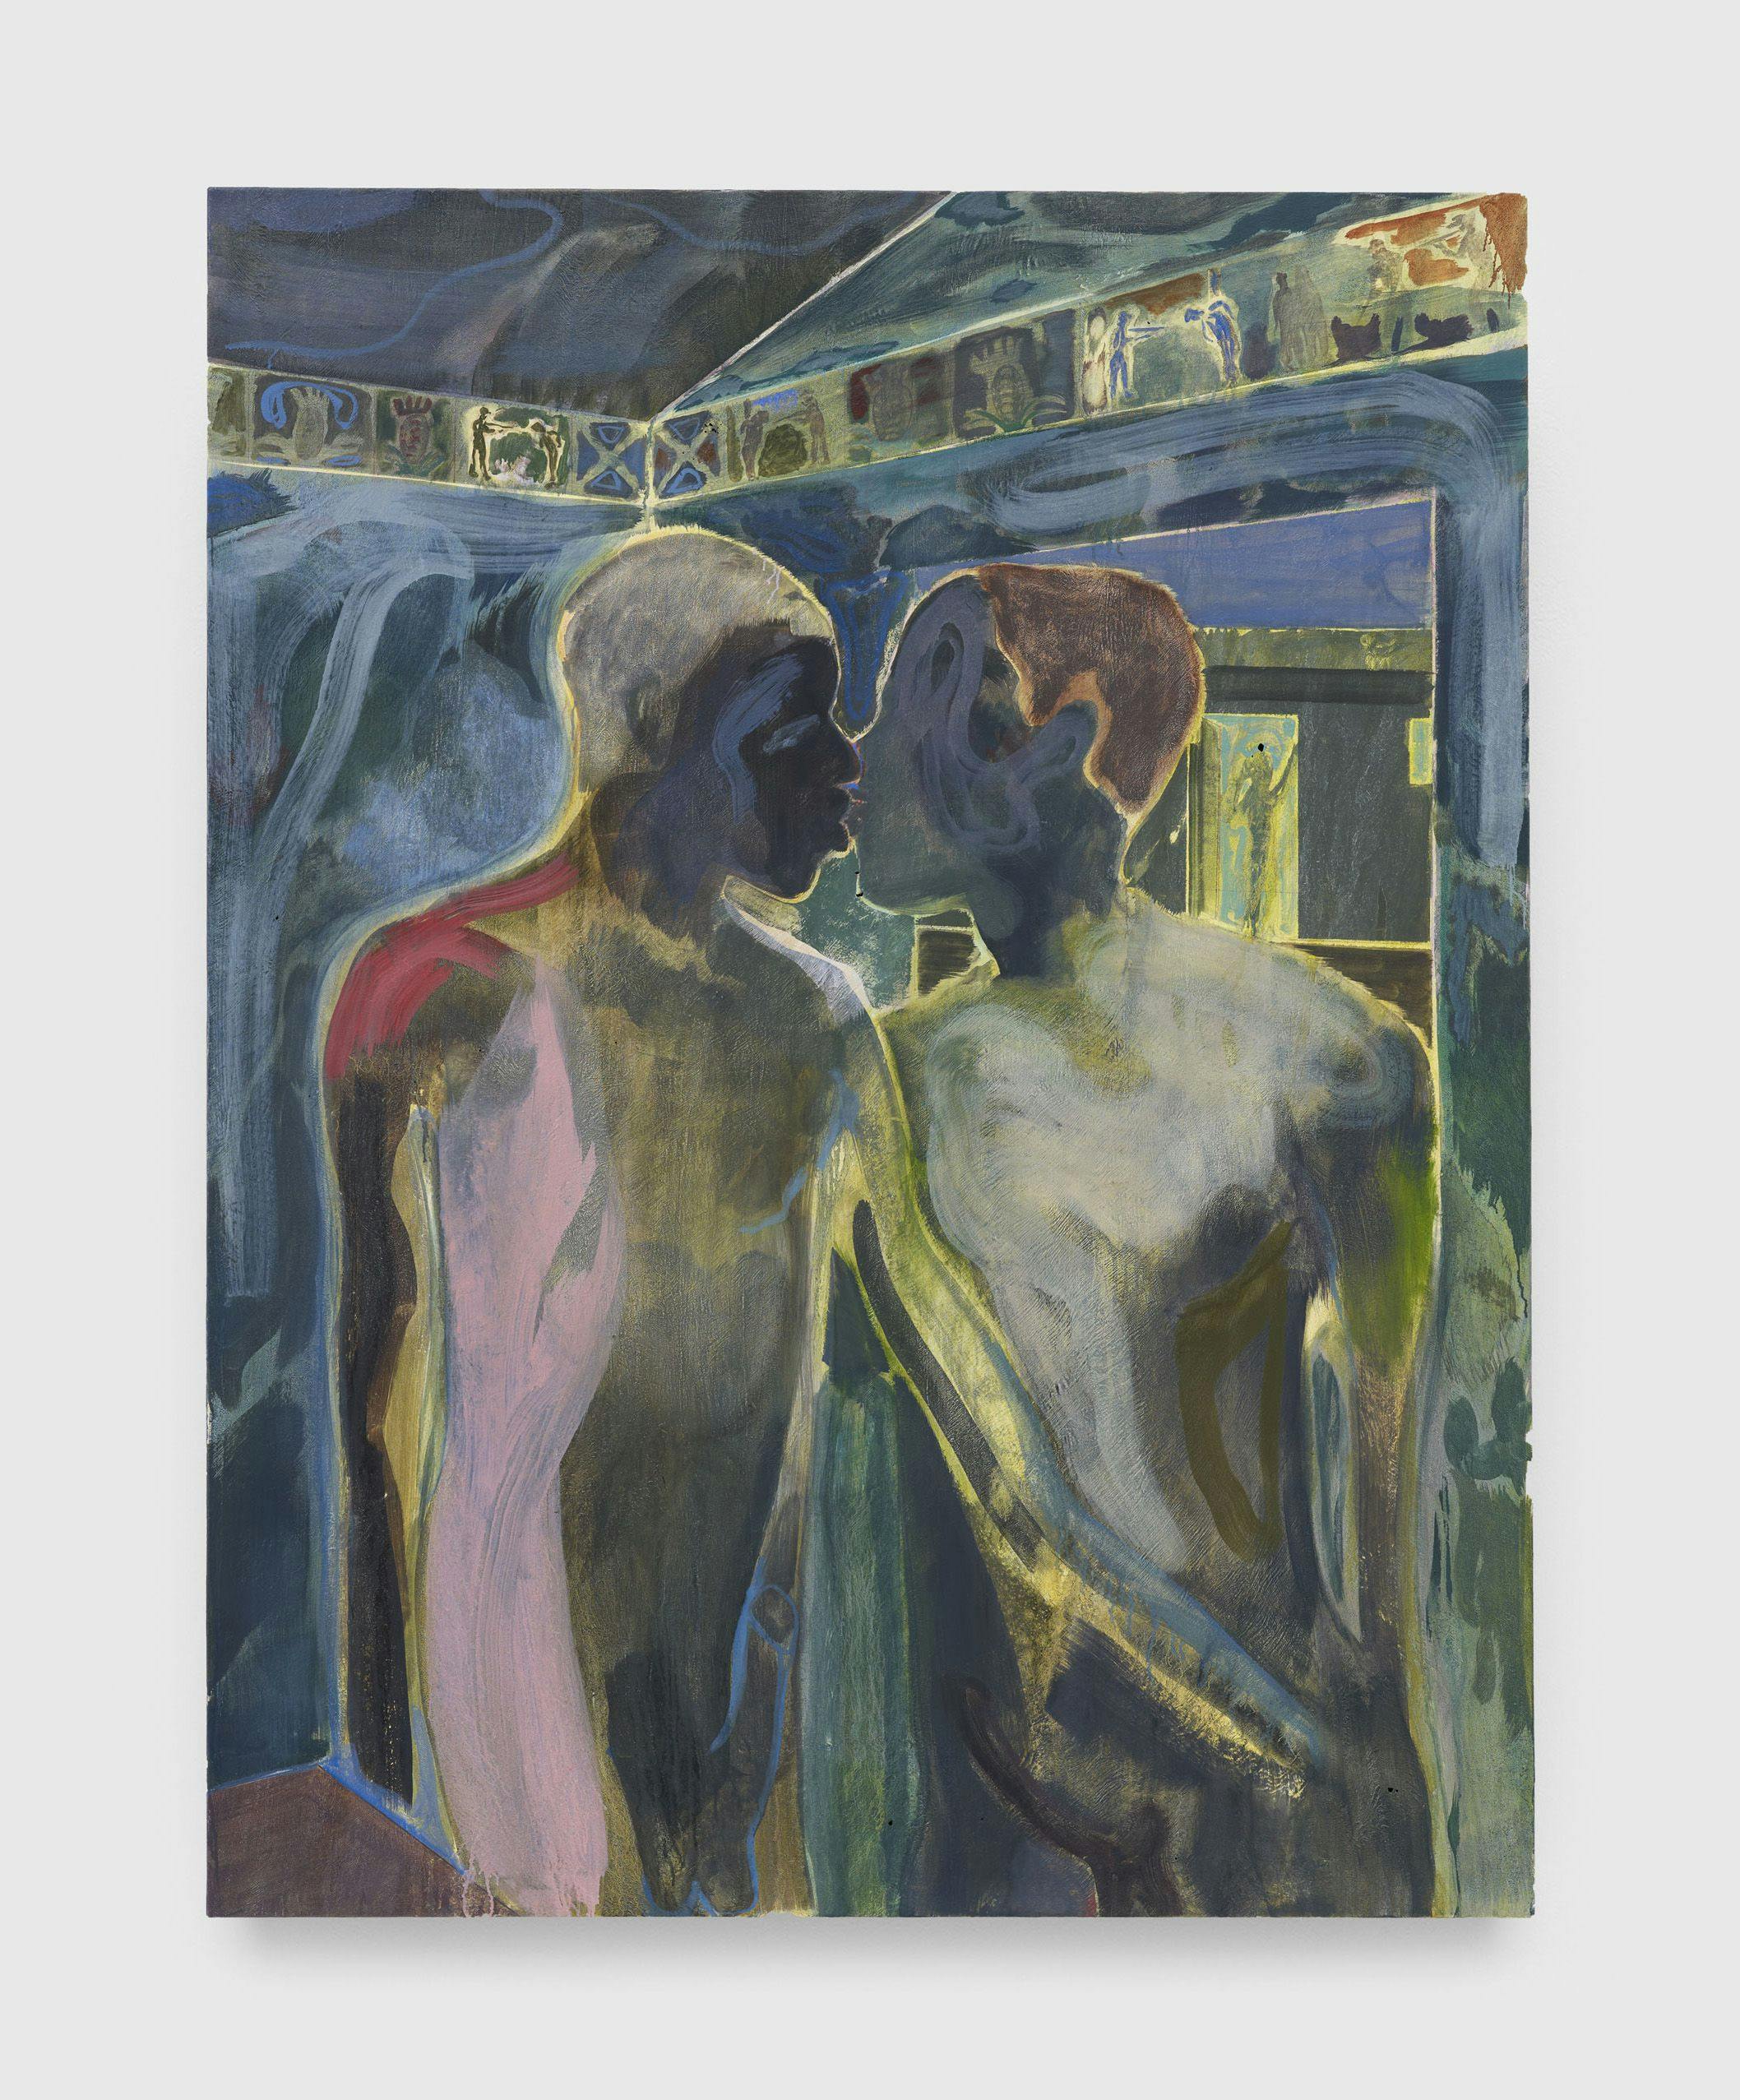 A painting by Michael Armitage, titled Kampala Suburb, dated 2014.